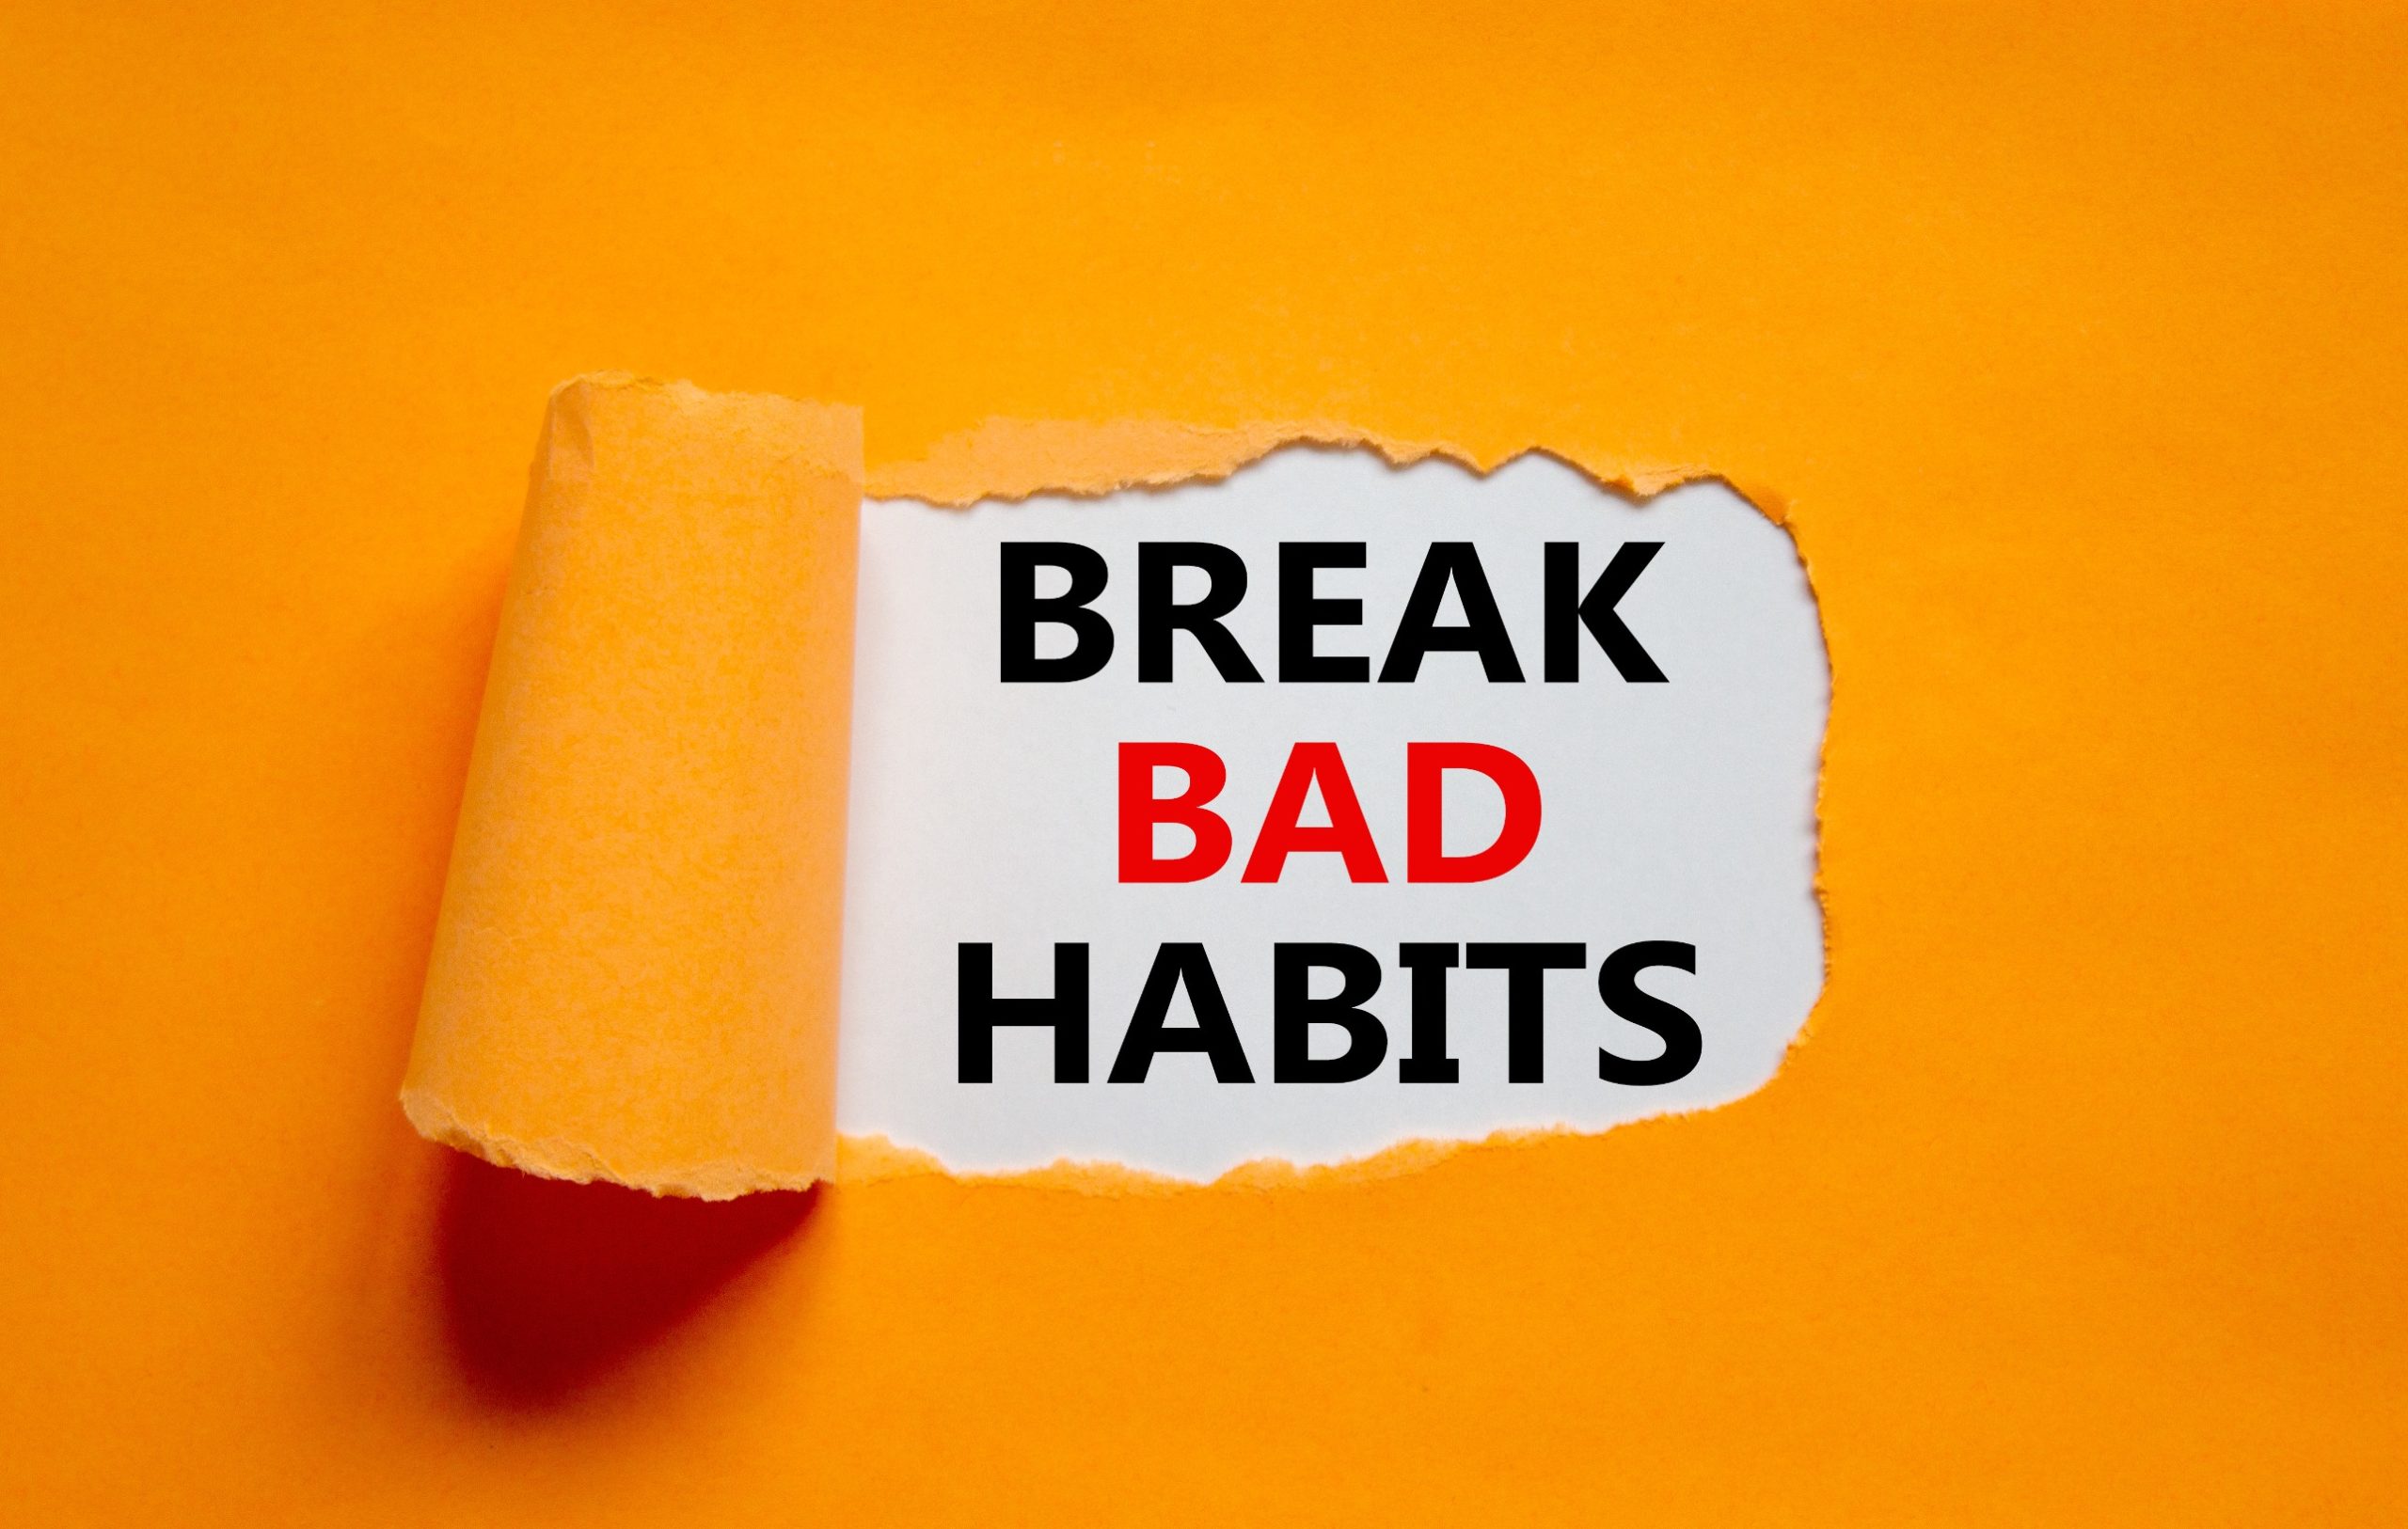 If you want to be really happy in life, you need to let go of some bad habits